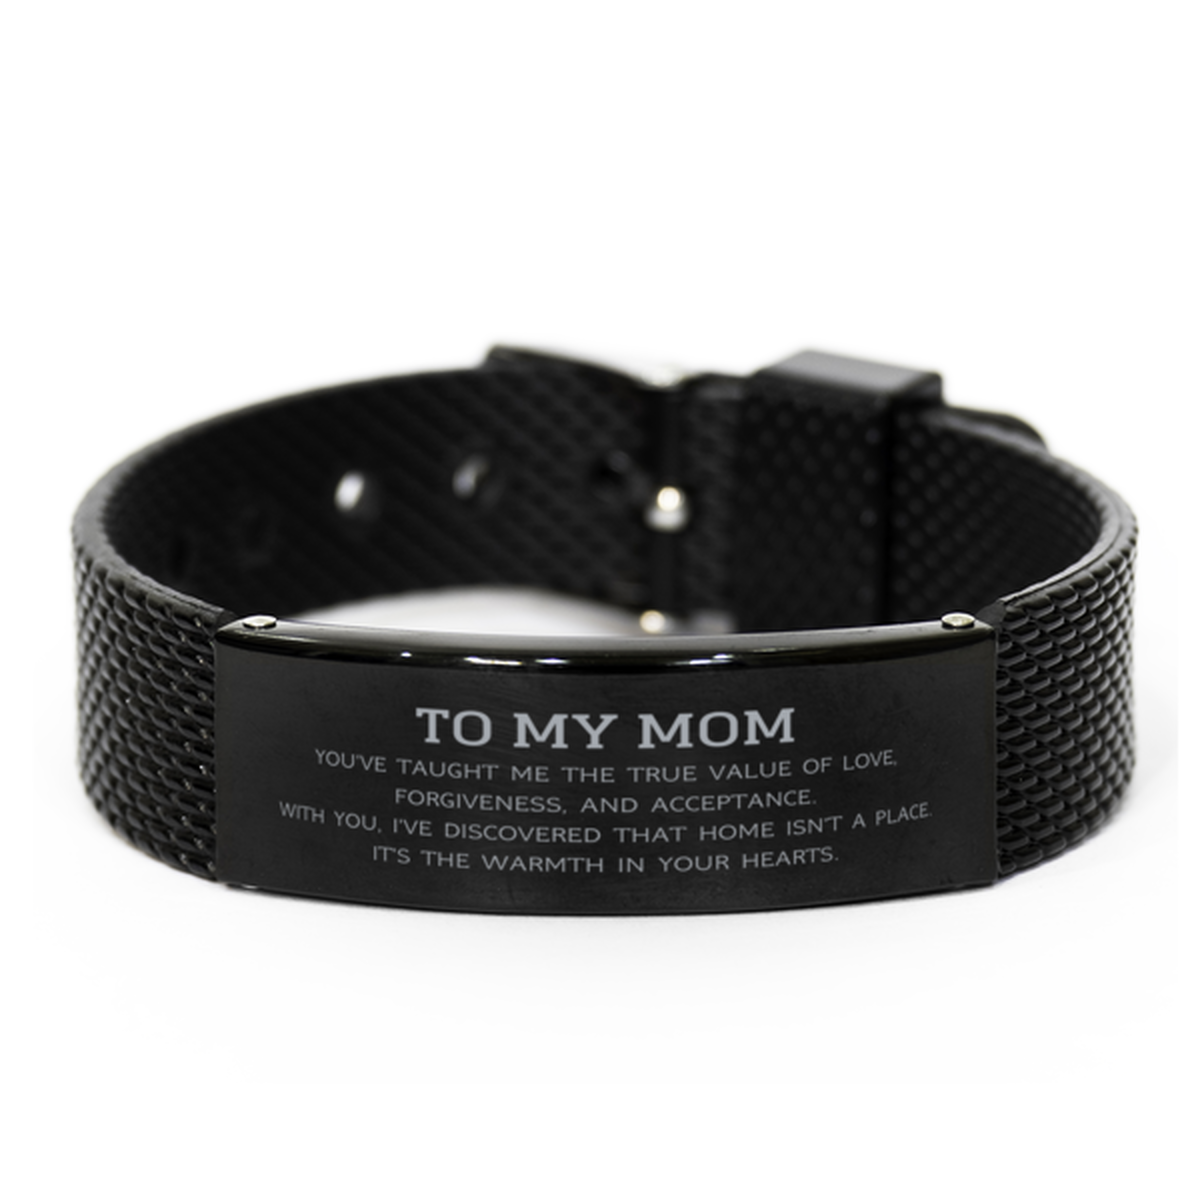 To My Mom Gifts, You've taught me the true value of love, Thank You Gifts For Mom, Birthday Black Shark Mesh Bracelet For Mom